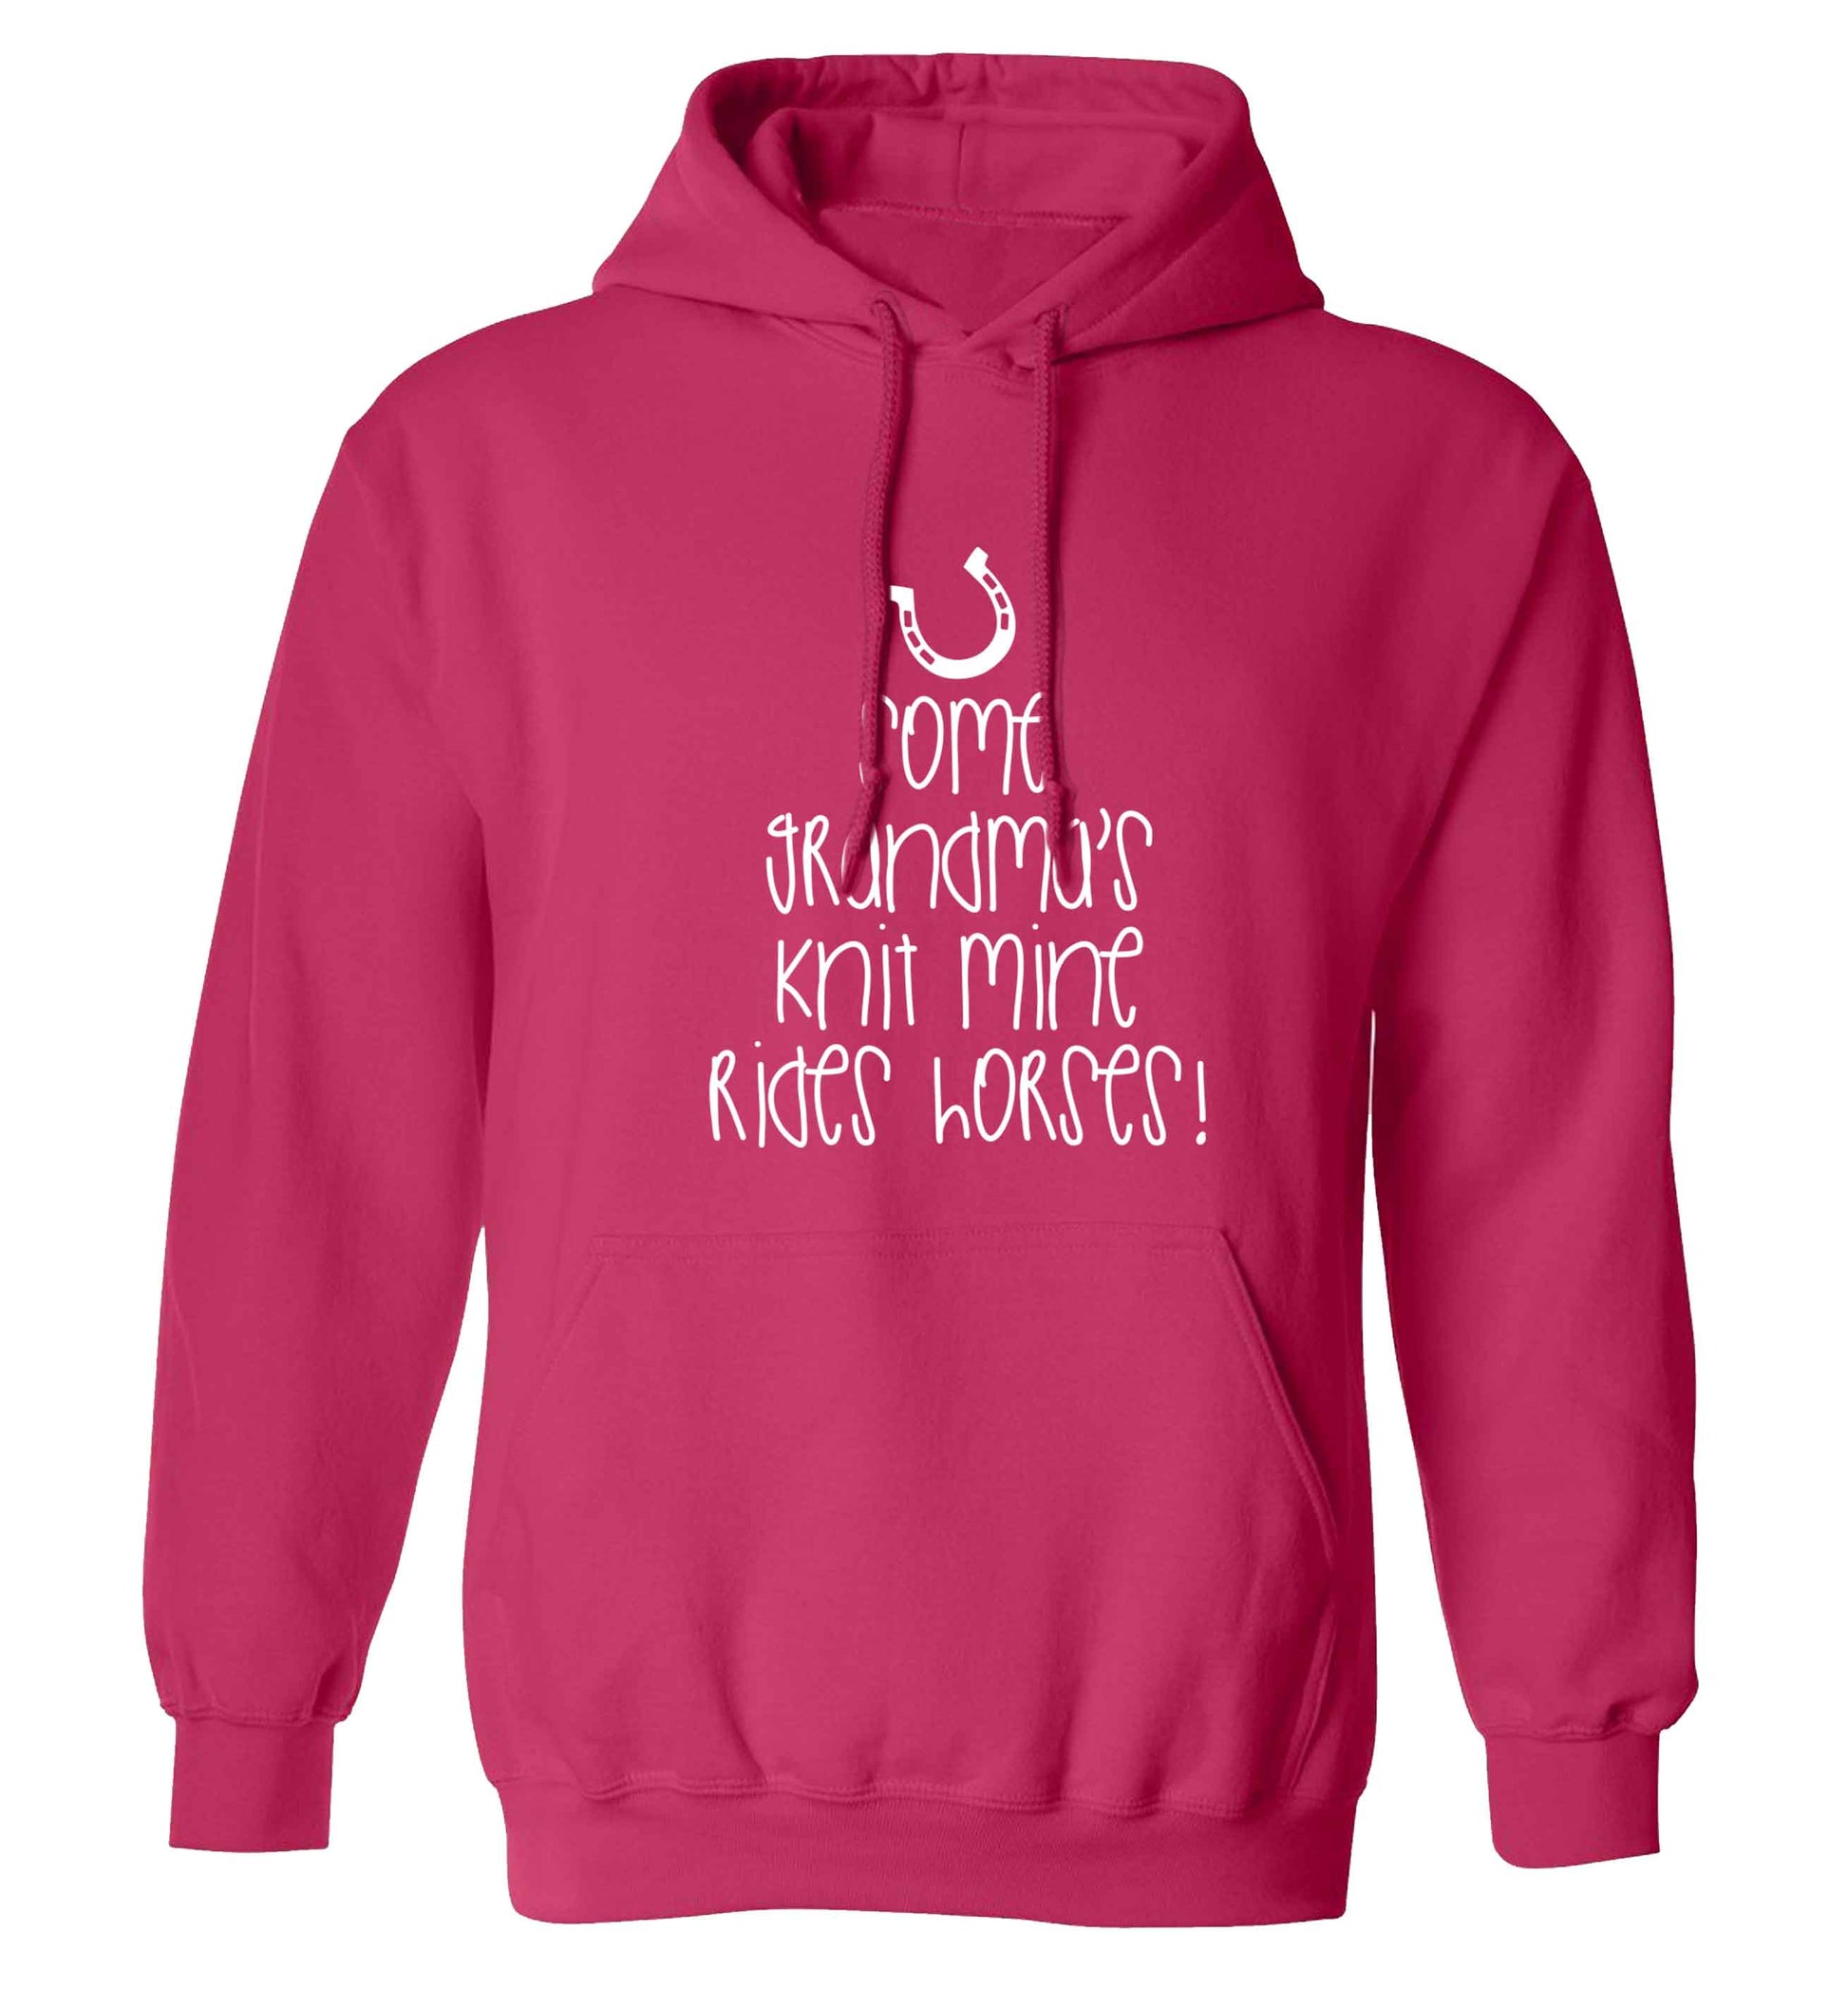 Some grandma's knit mine rides horses adults unisex pink hoodie 2XL